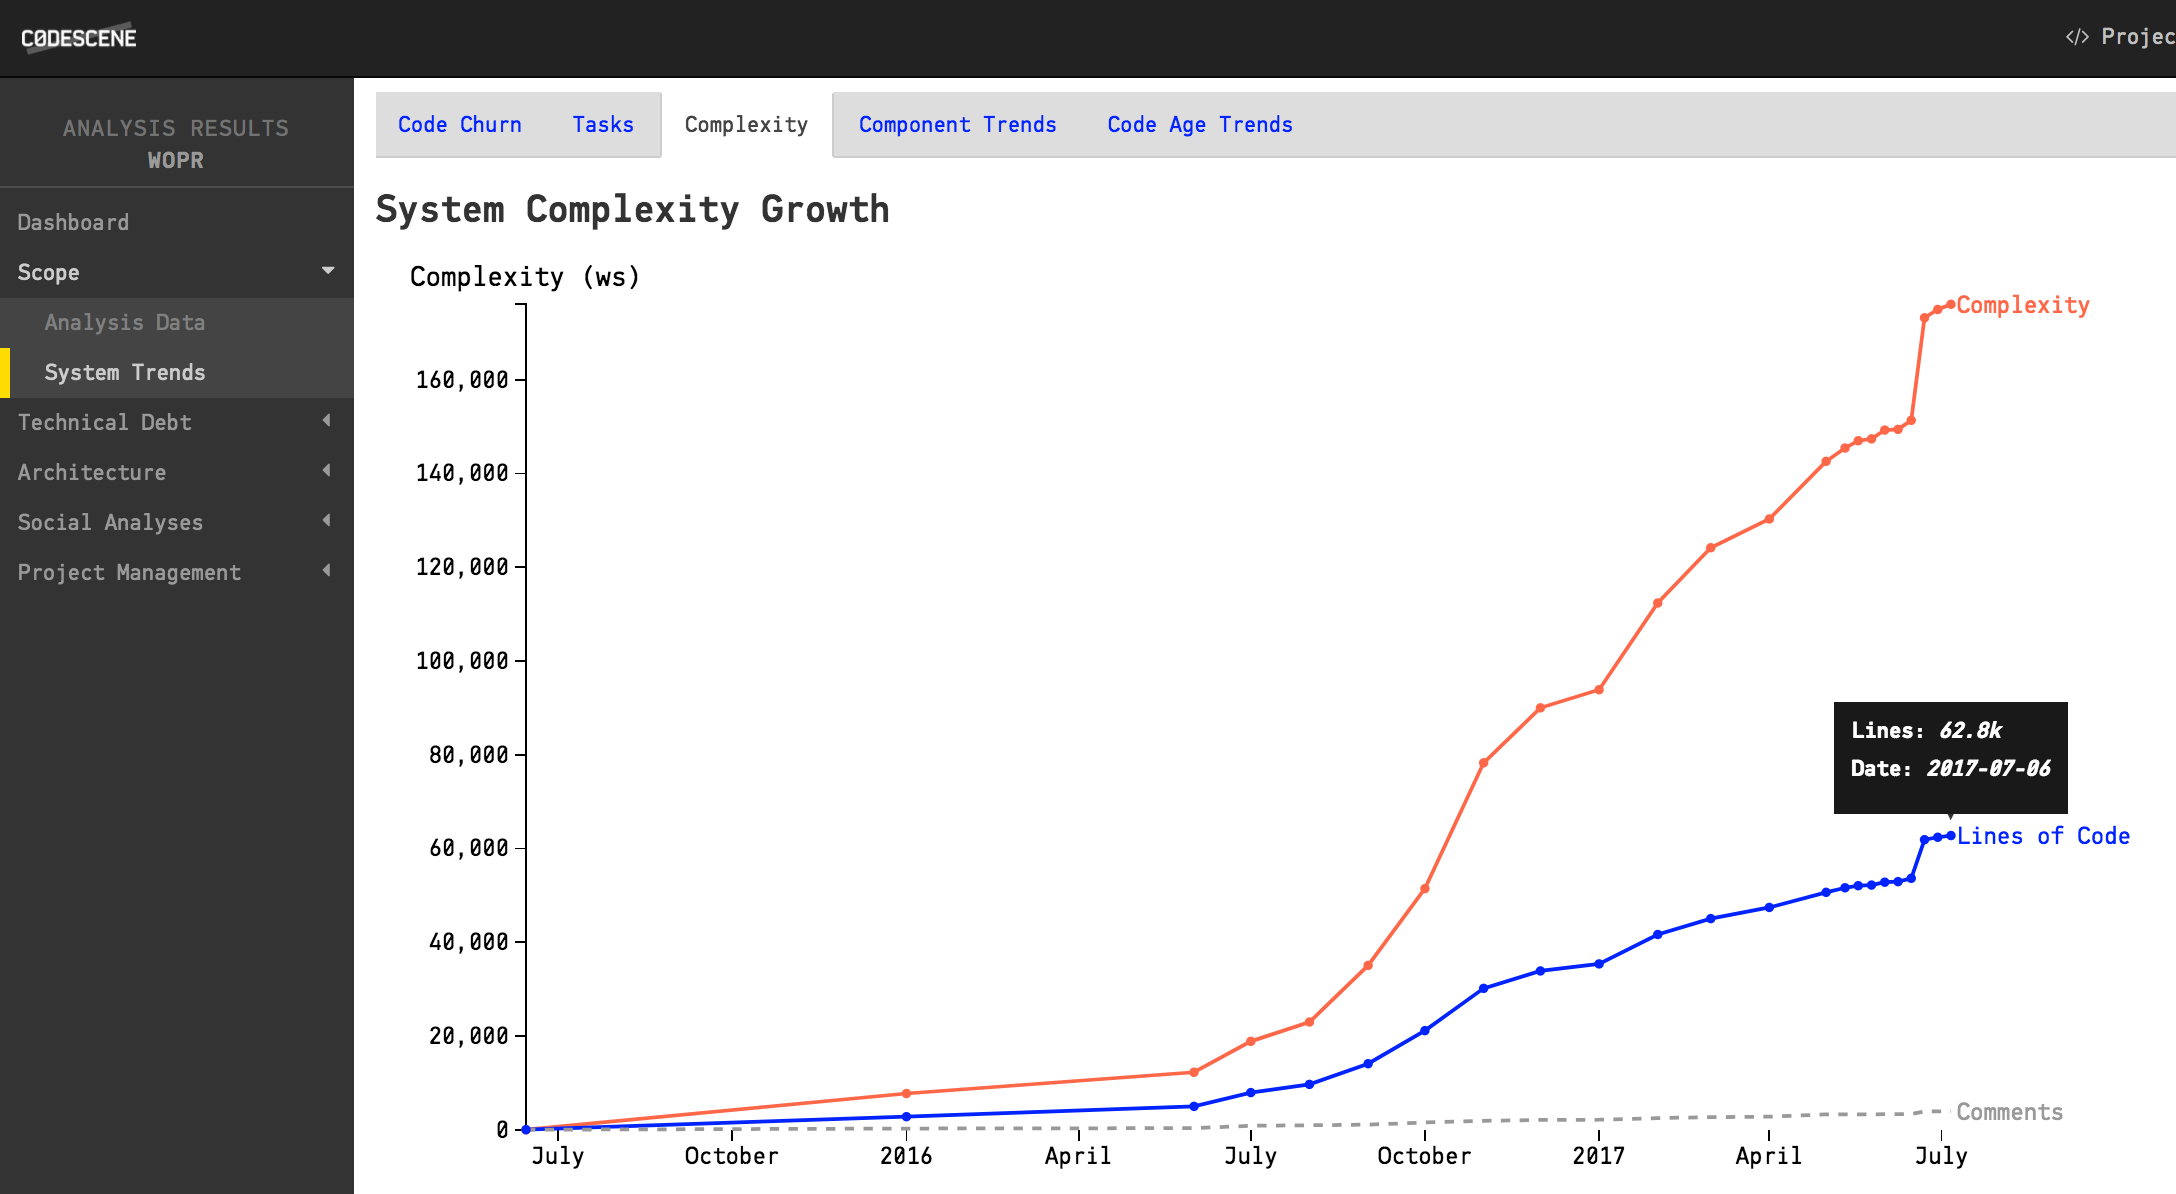 The system complexity trend